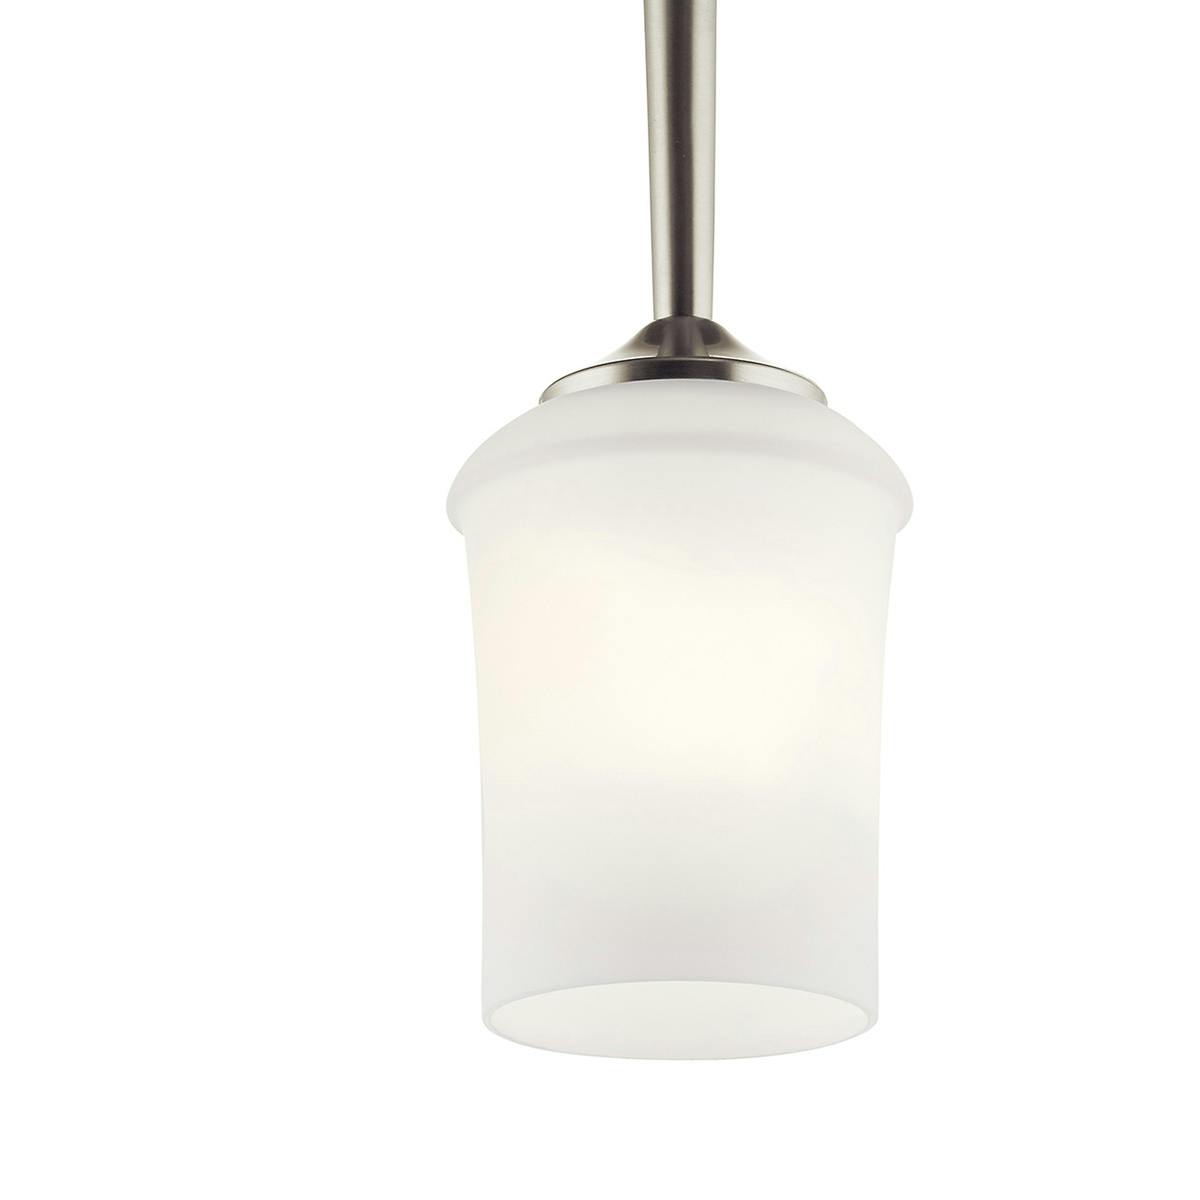 Close up view of the Aubrey Mini Pendant in Brushed Nickel on a white background